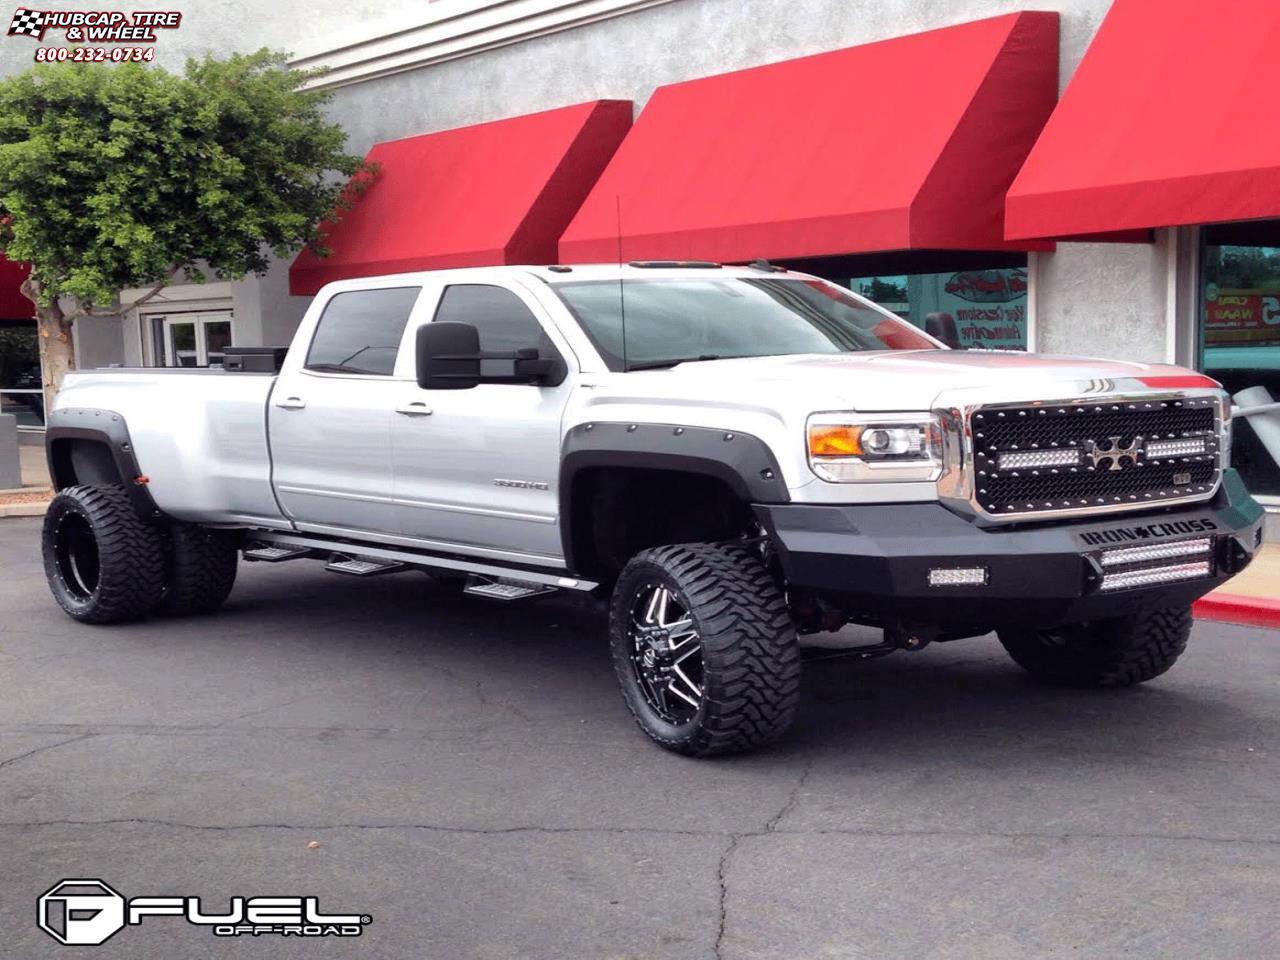 vehicle gallery/chevrolet silverado fuel full blown dually front d254 0X0  Custom wheels and rims